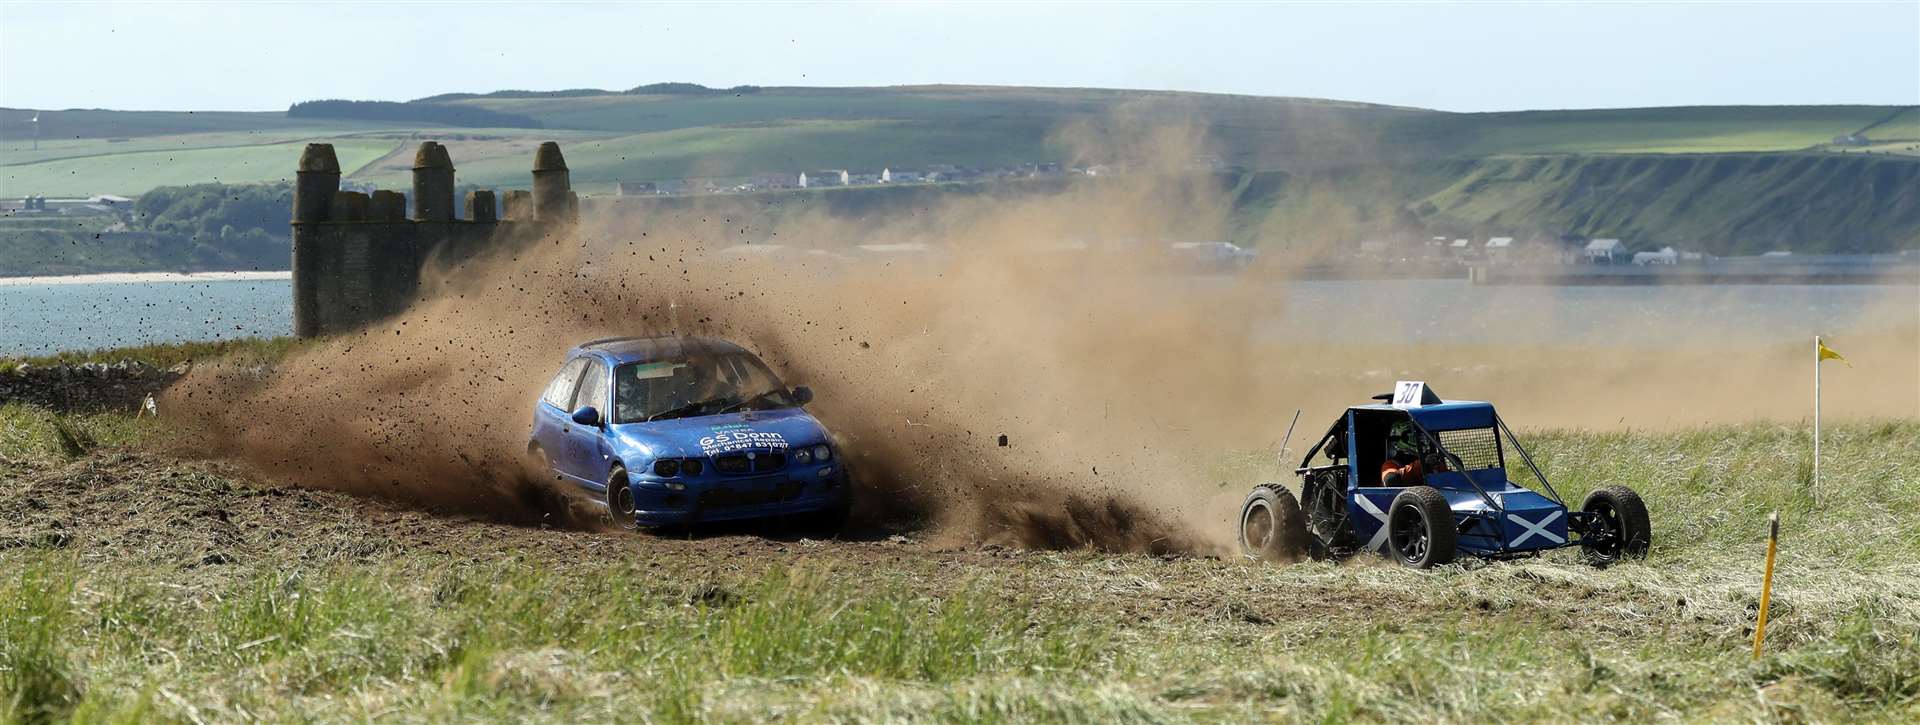 Jake Anderson (MG ZR) tries to catch up with Mark Foubister in his special buggy with Harold's Tower in the background. Picture: James Gunn